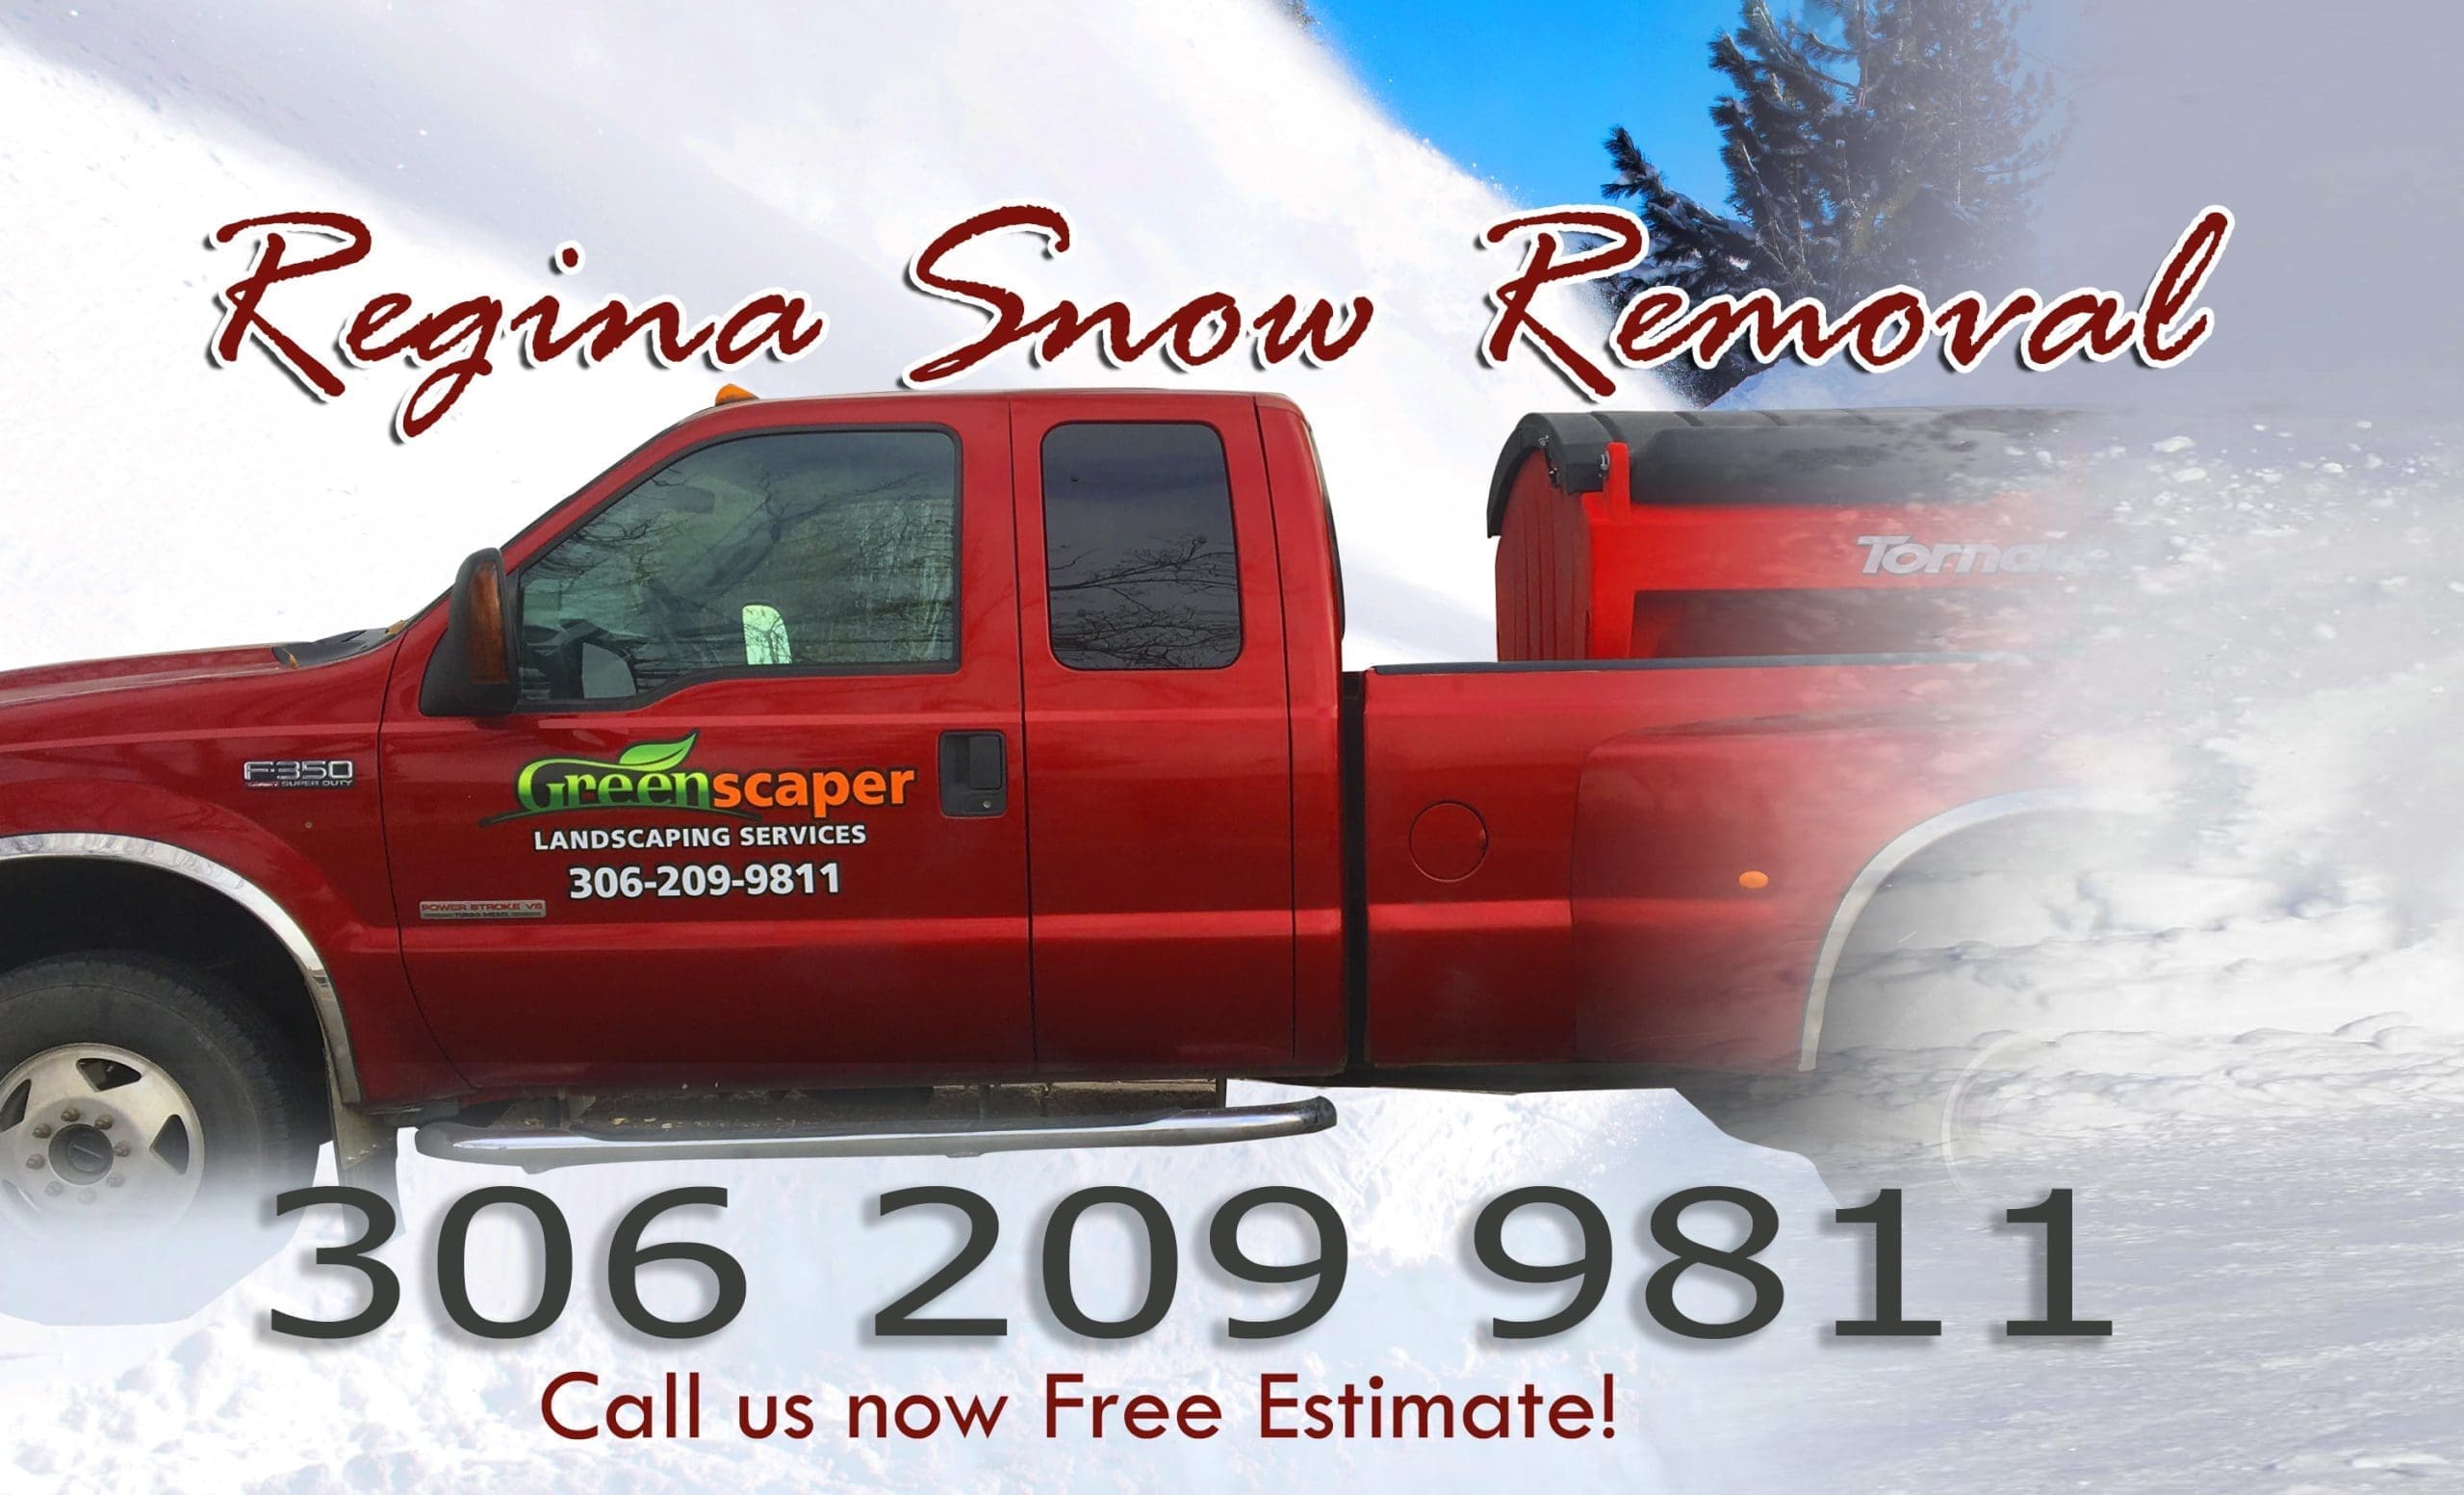 Regina snow removal service in nearby towns